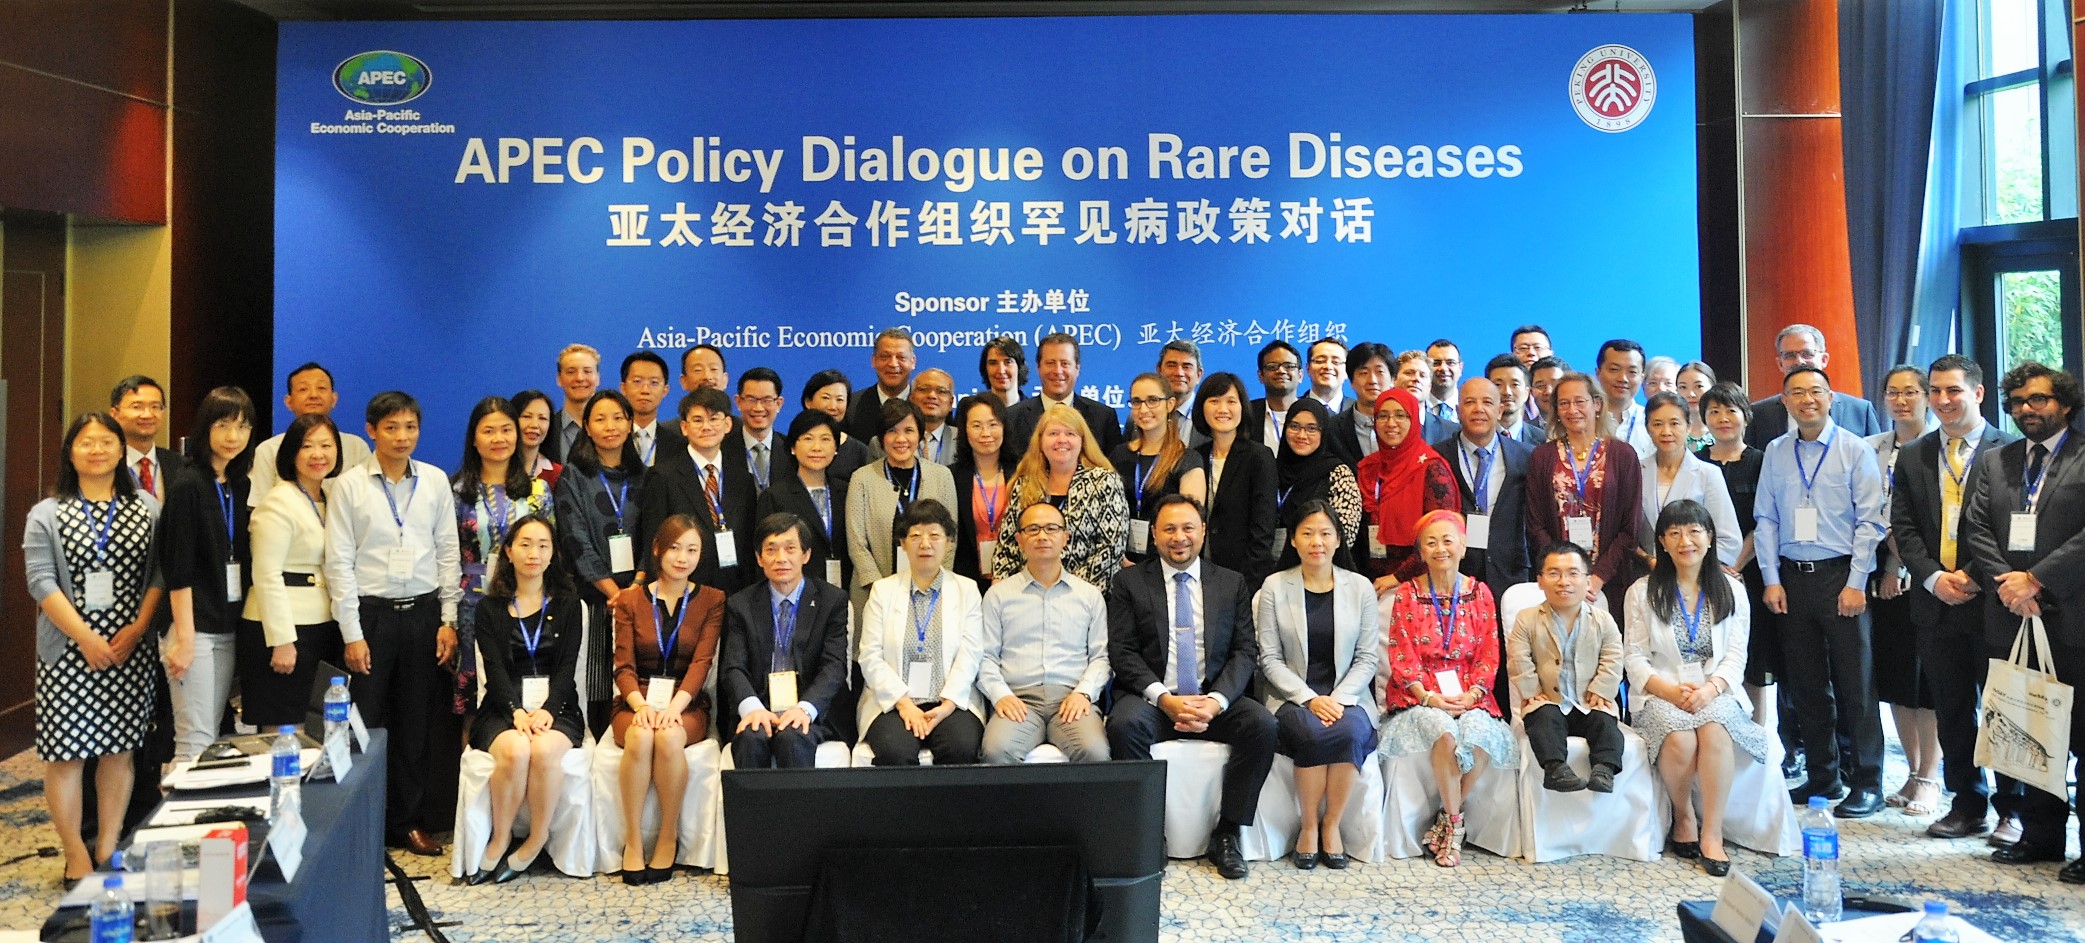 Group photo of the 1st APEC Policy Dialogue on Rare Diseases in Beijing, China, organized by the APEC Rare Disease Network